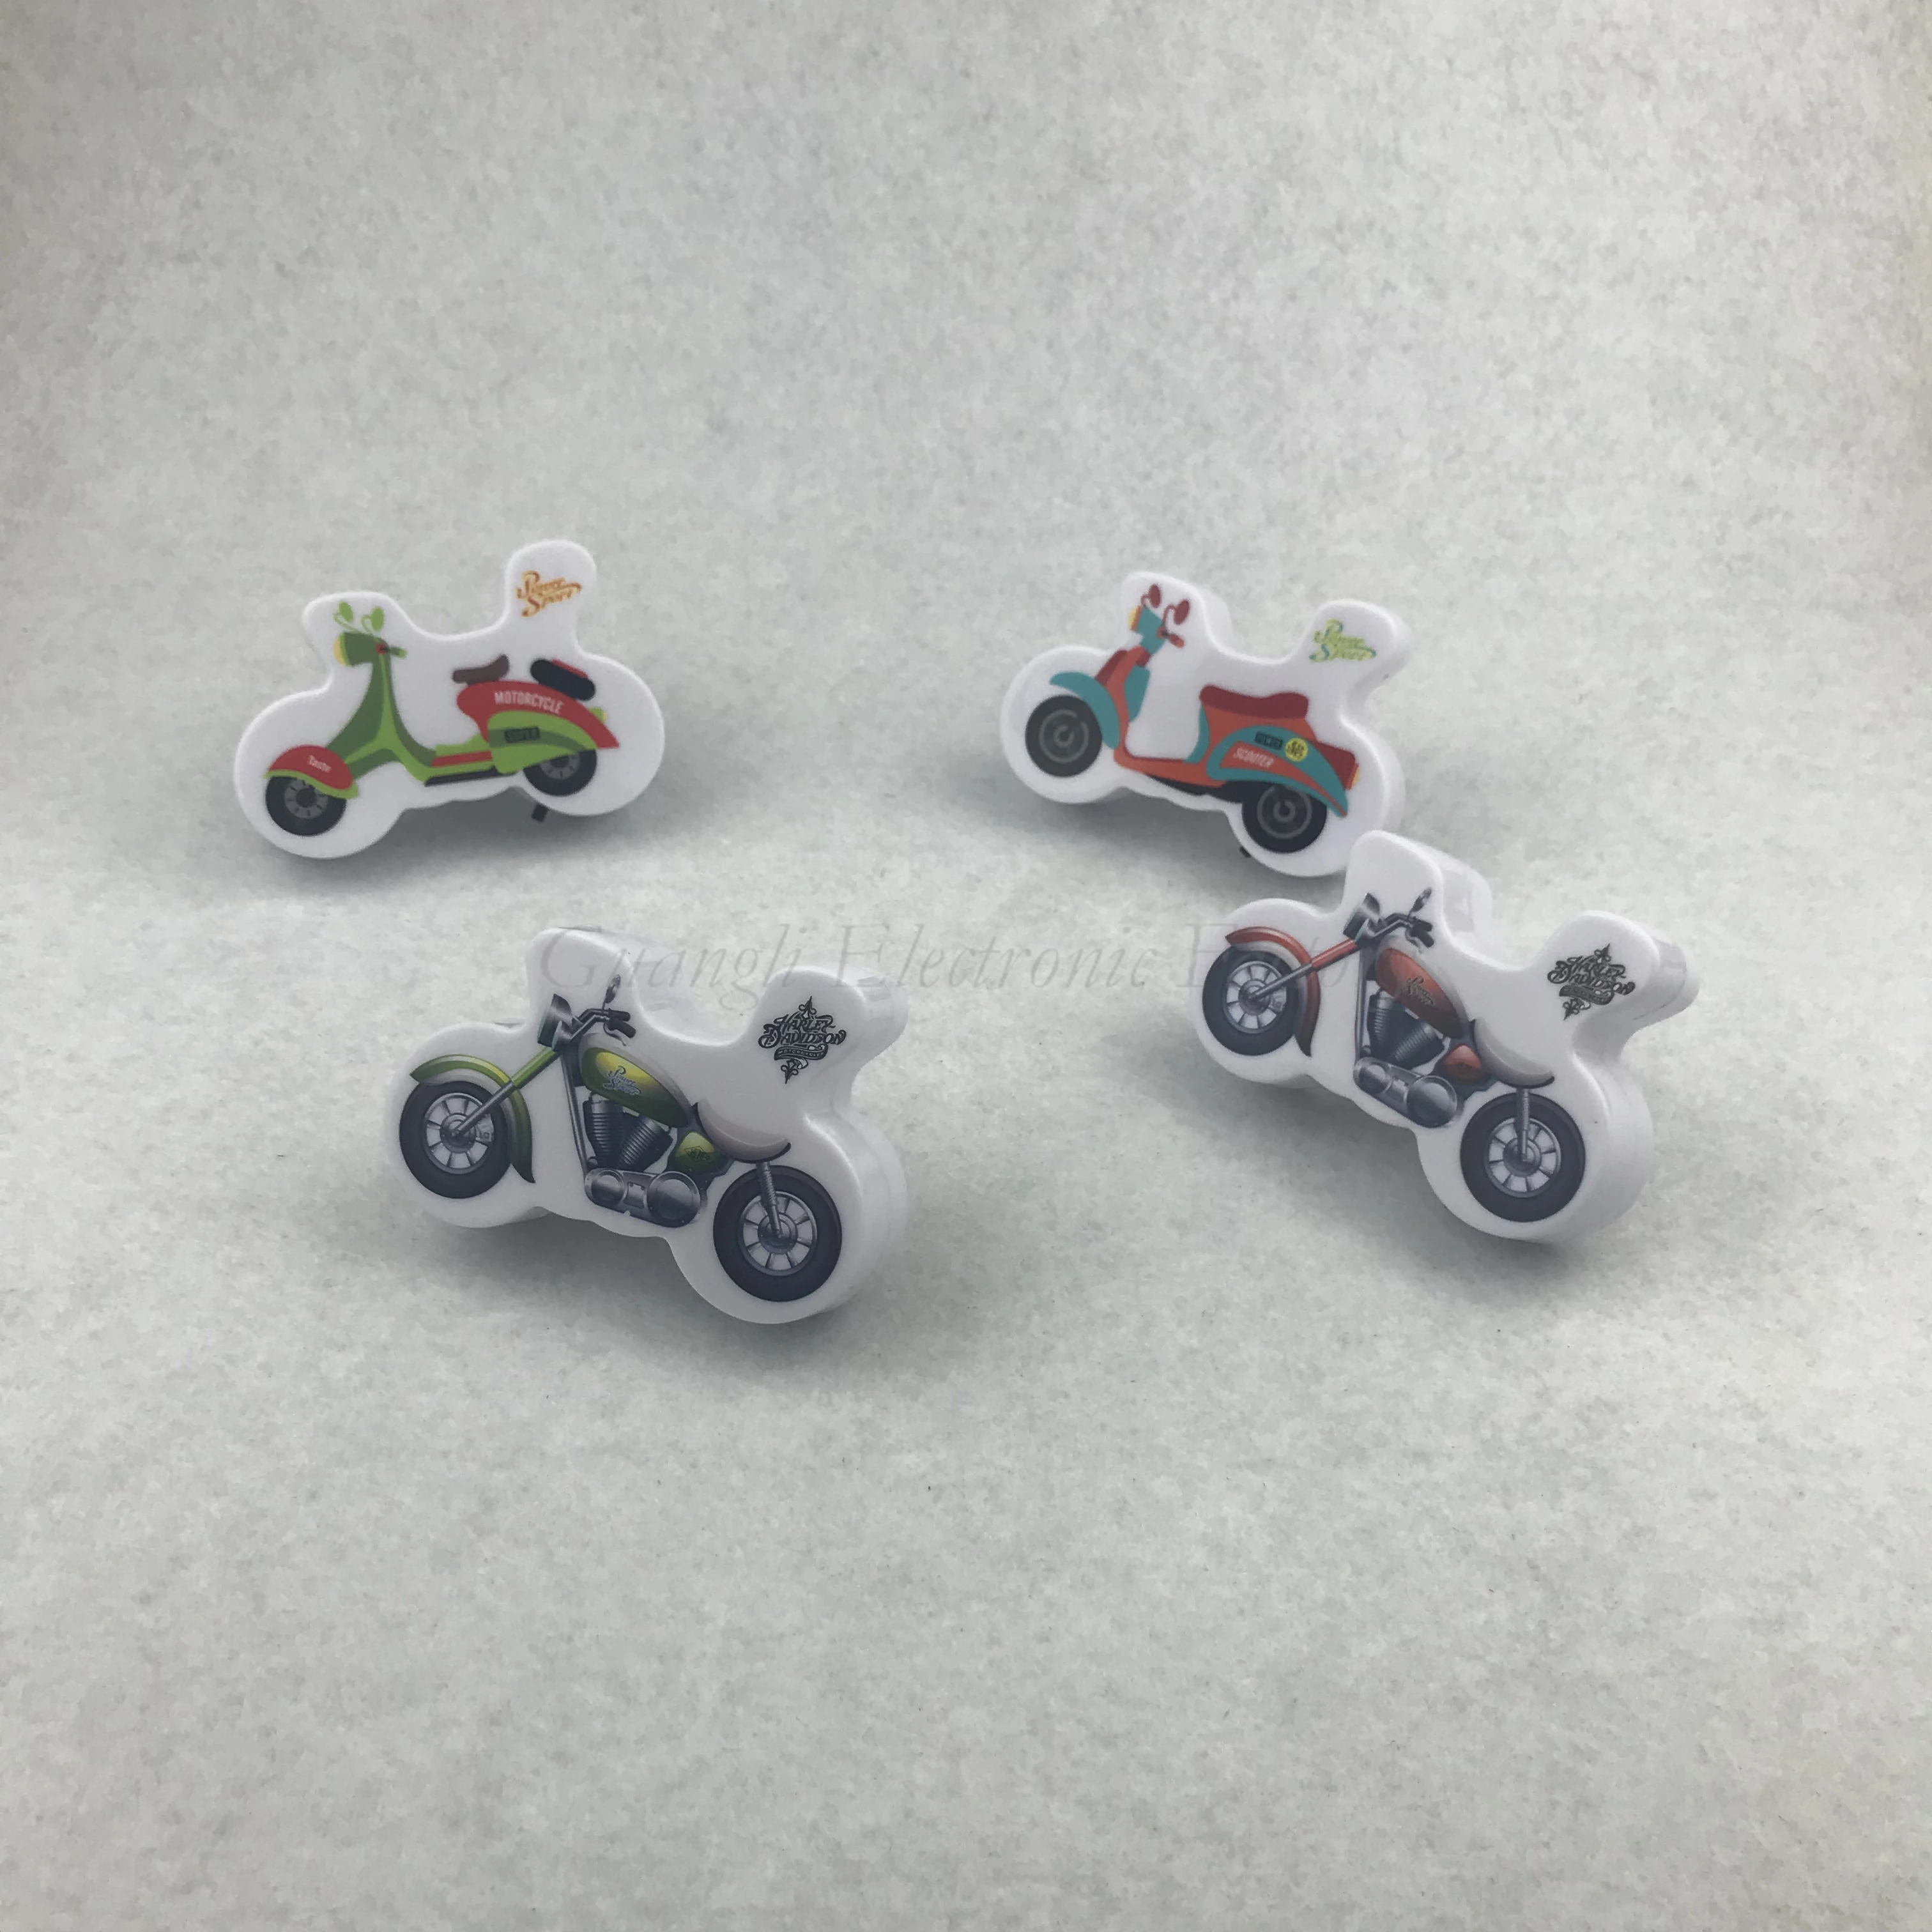 W012 OEM 4SMD mini switch plug in motorbike Motorcycle cartoon room usege night light For Baby Bedroom cute gift